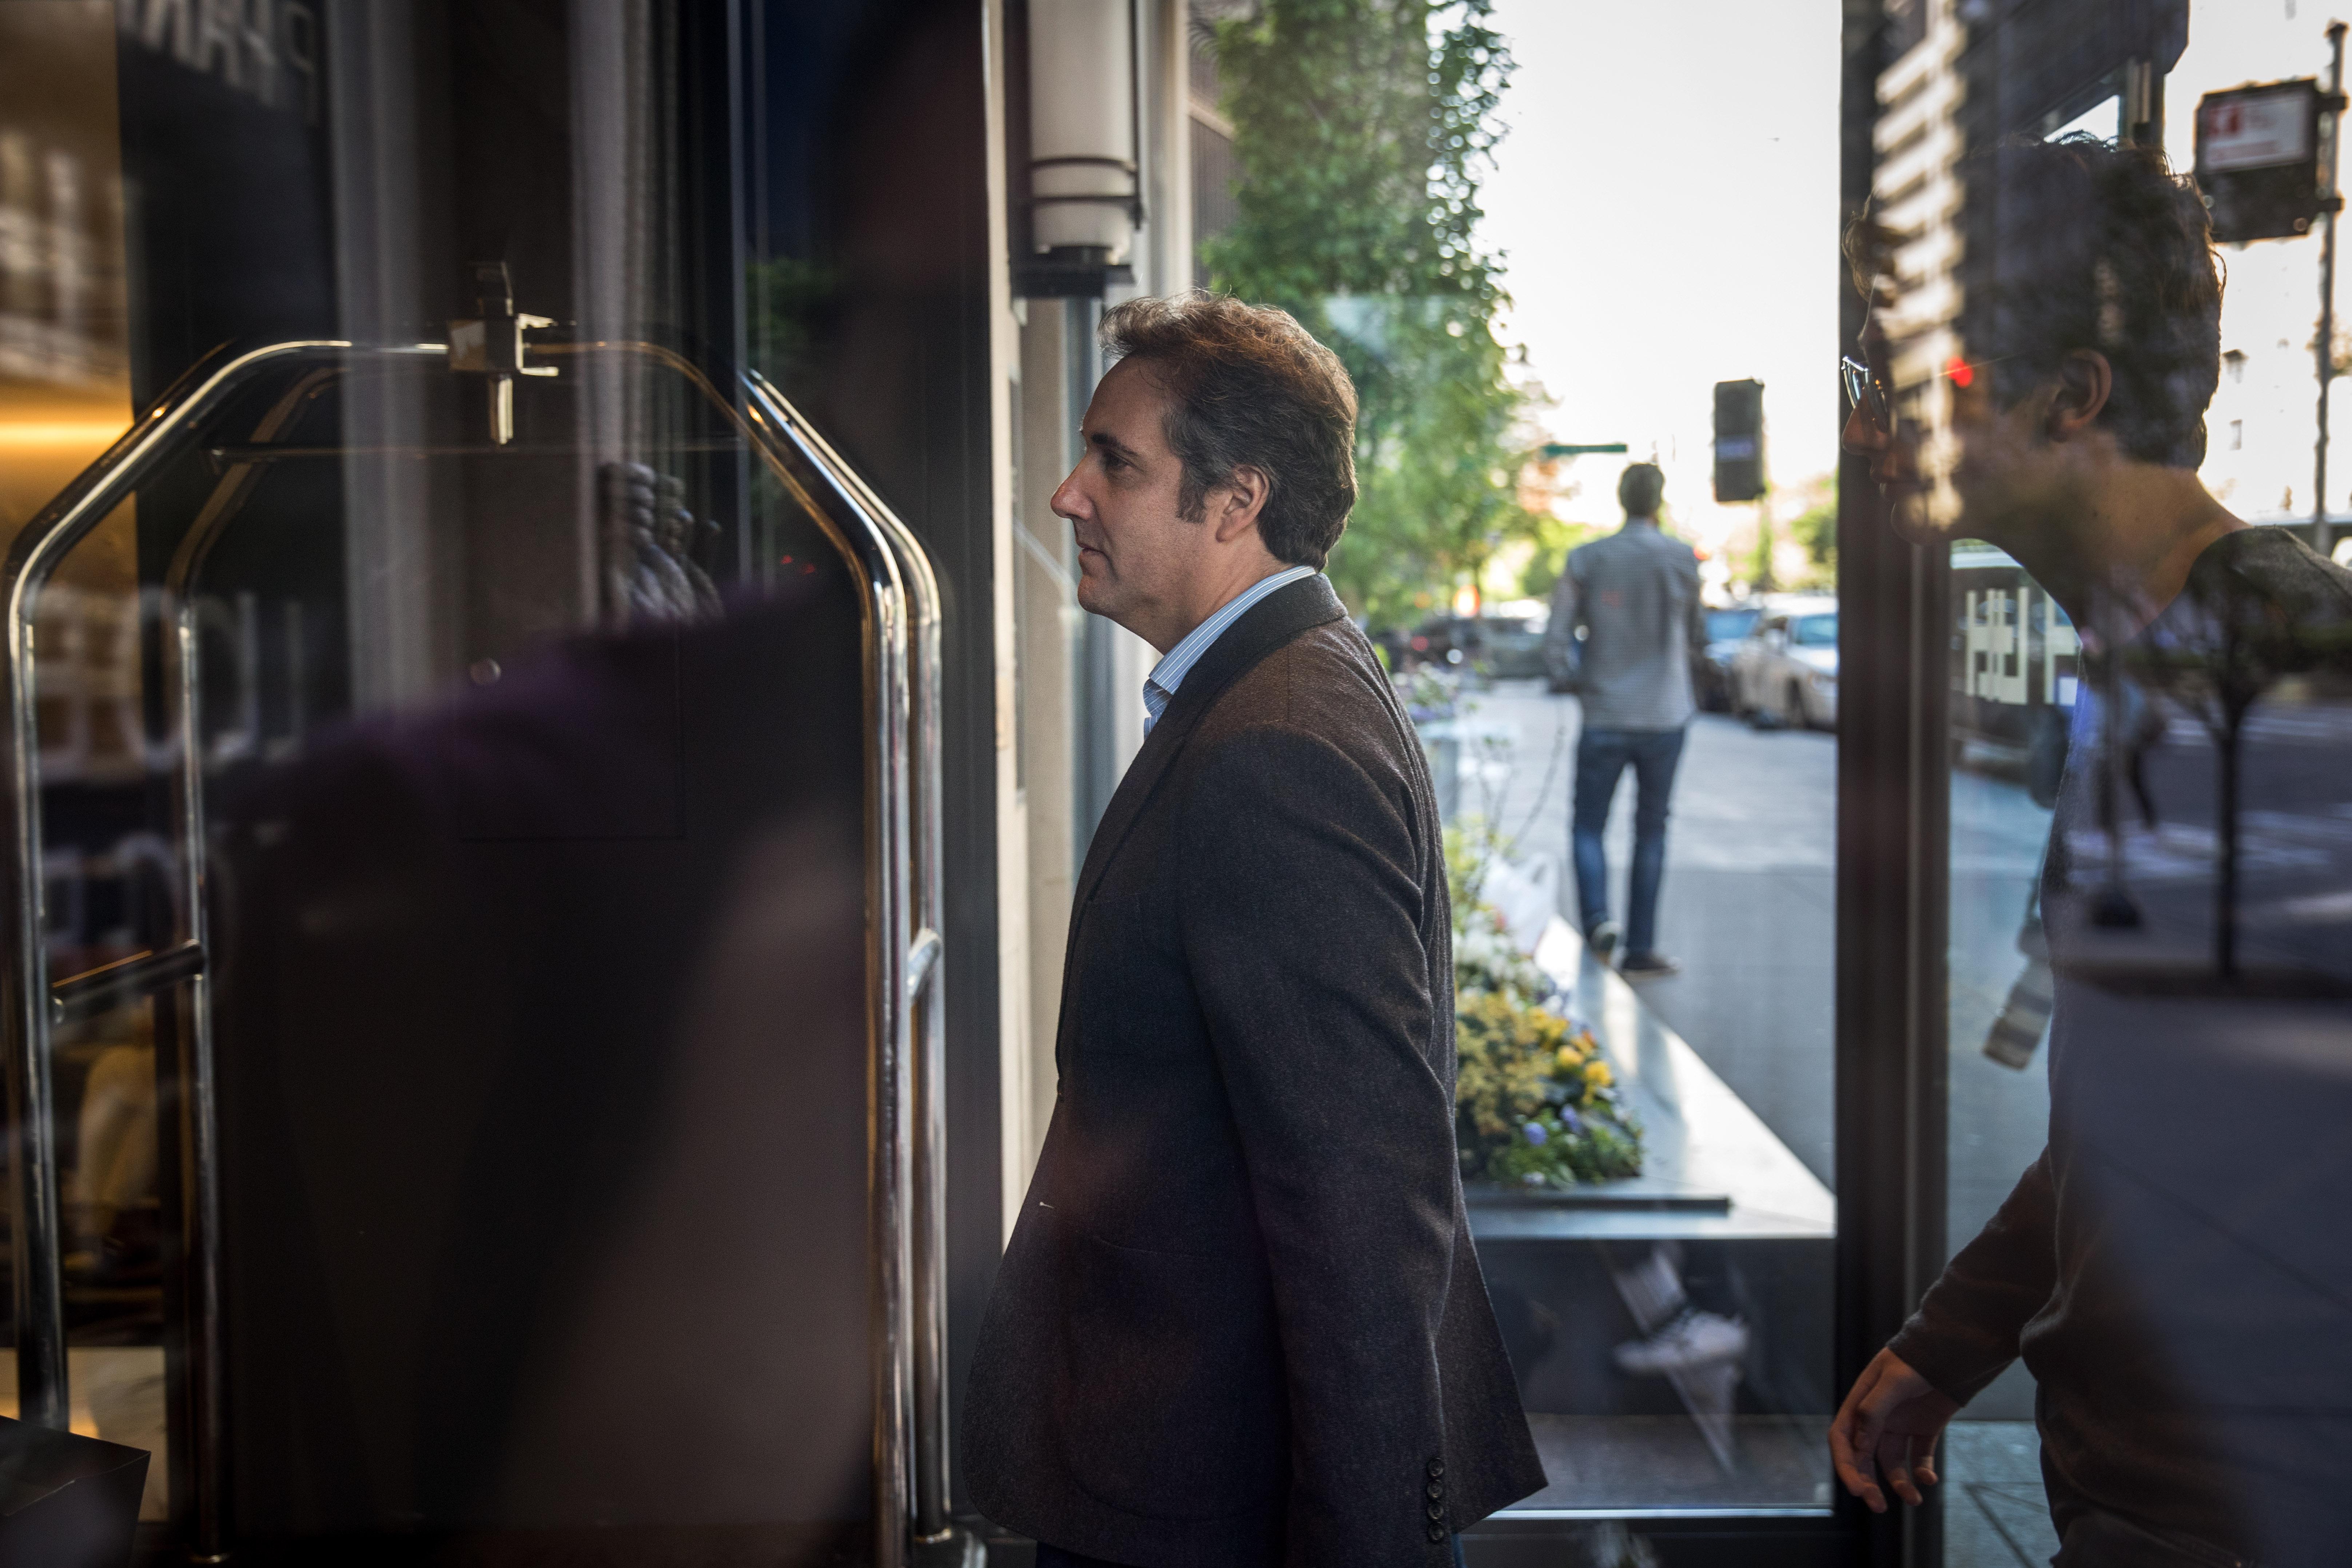 Michael Cohen, former personal attorney for President Donald Trump, arrives at the Loews Regency Hotel, May 11, 2018 in New York City. 